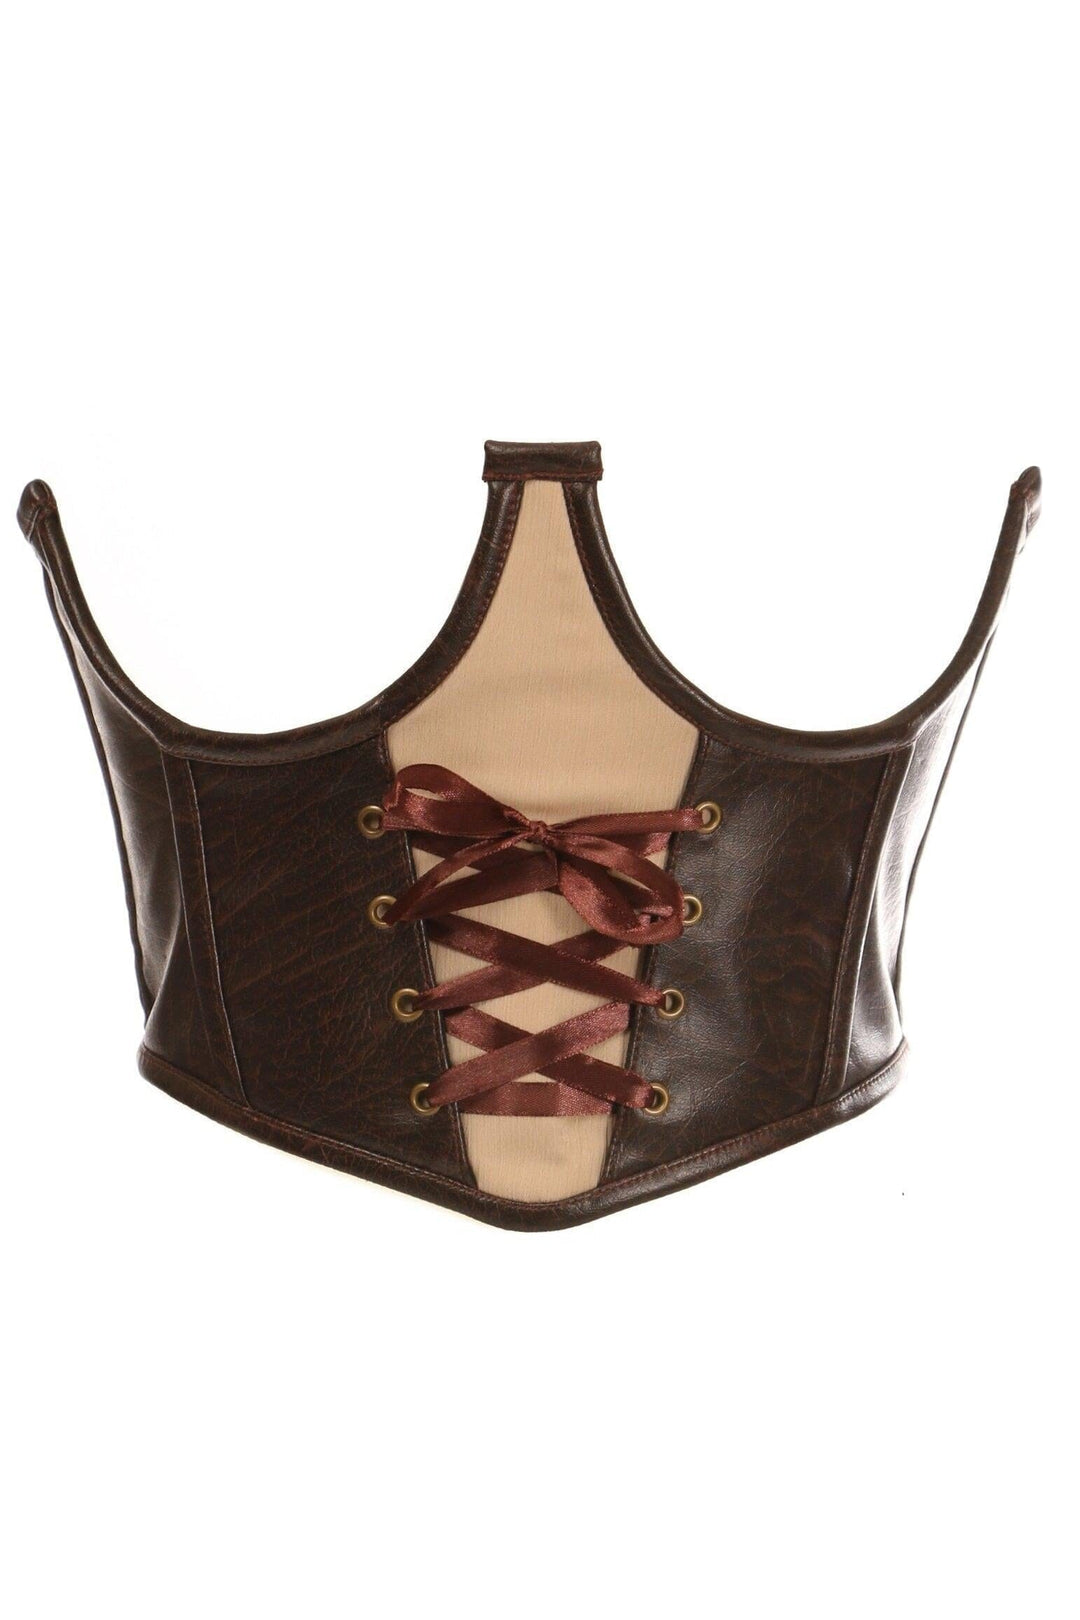 Top Drawer Faux Leather Steel Boned Lace-Up Open Cup Waist Cincher-Waist Cincher-Daisy Corsets-Black-2X-SEXYSHOES.COM